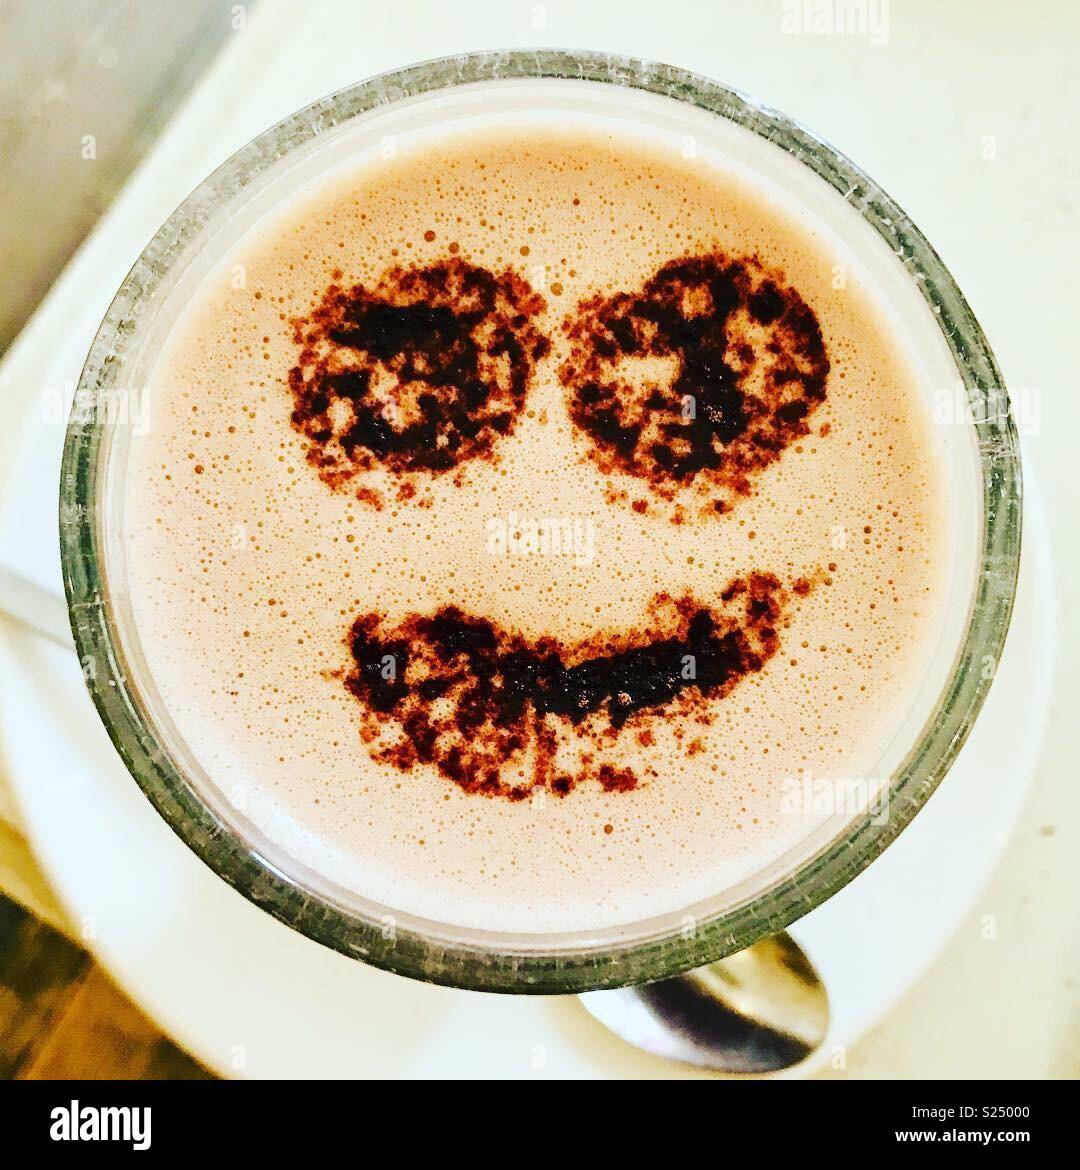 Hot chocolate with smiley face. Stock Photo